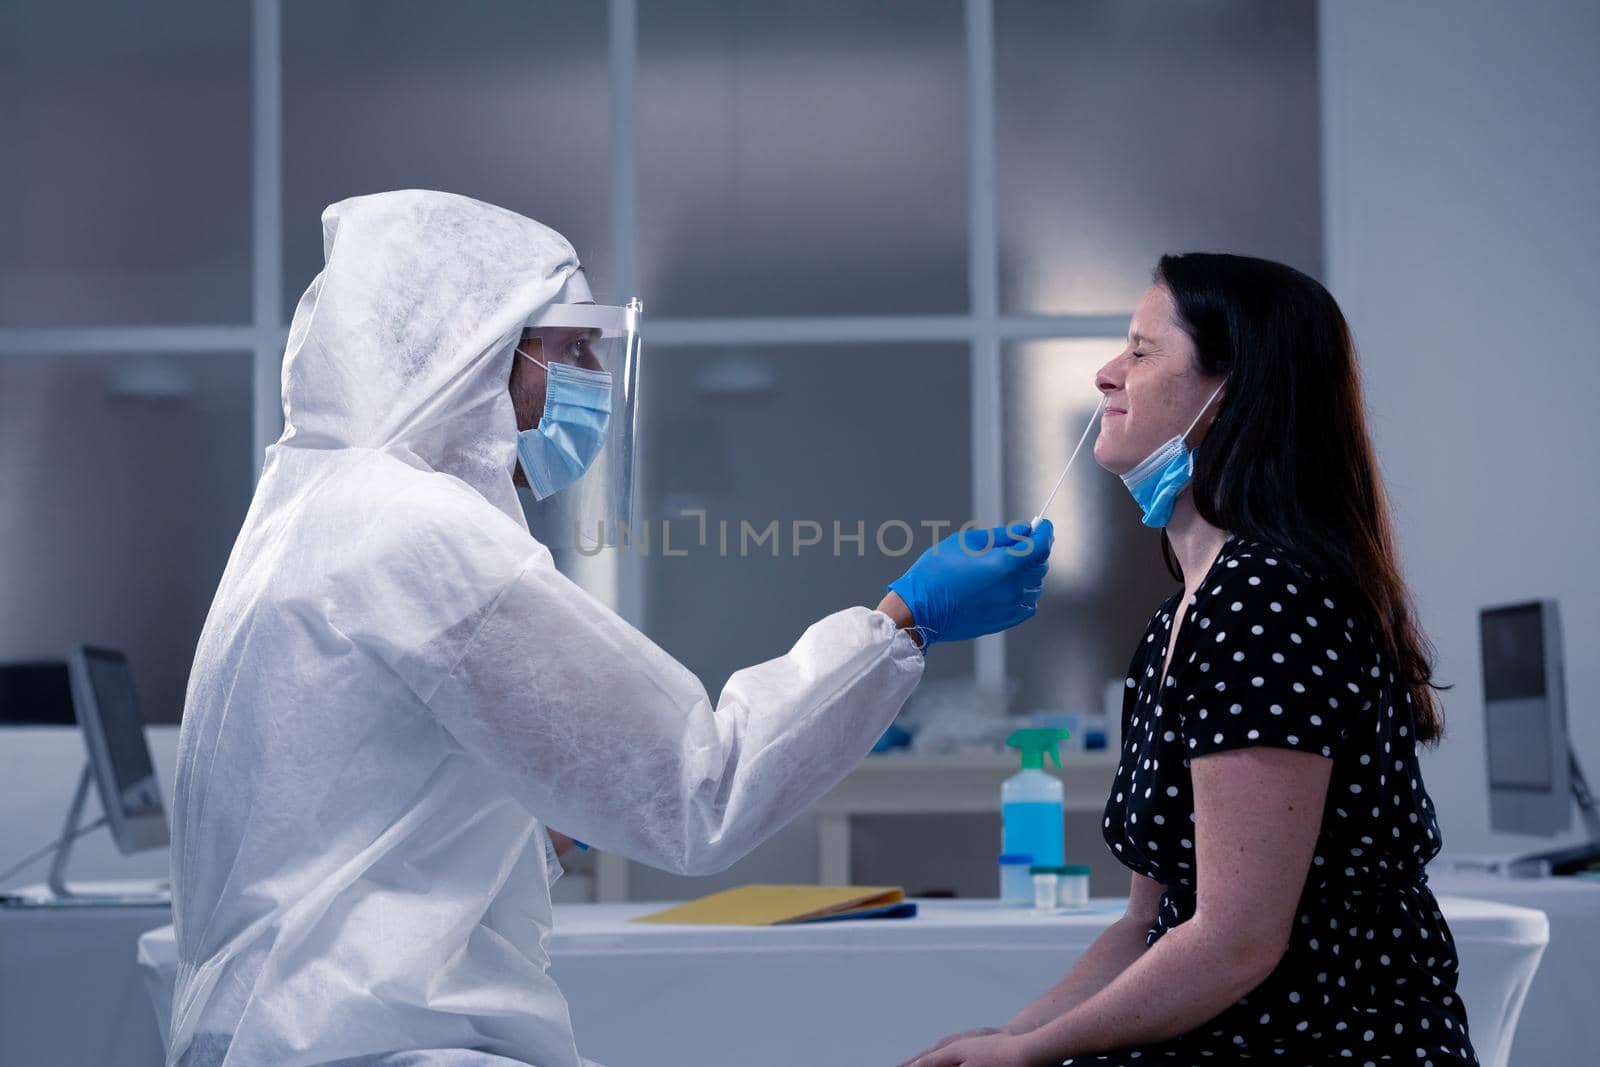 Caucasian male medical worker wearing protective clothing taking swab of masked female patient. healthcare, medical research technology and hygiene during coronavirus covid 19 pandemic.